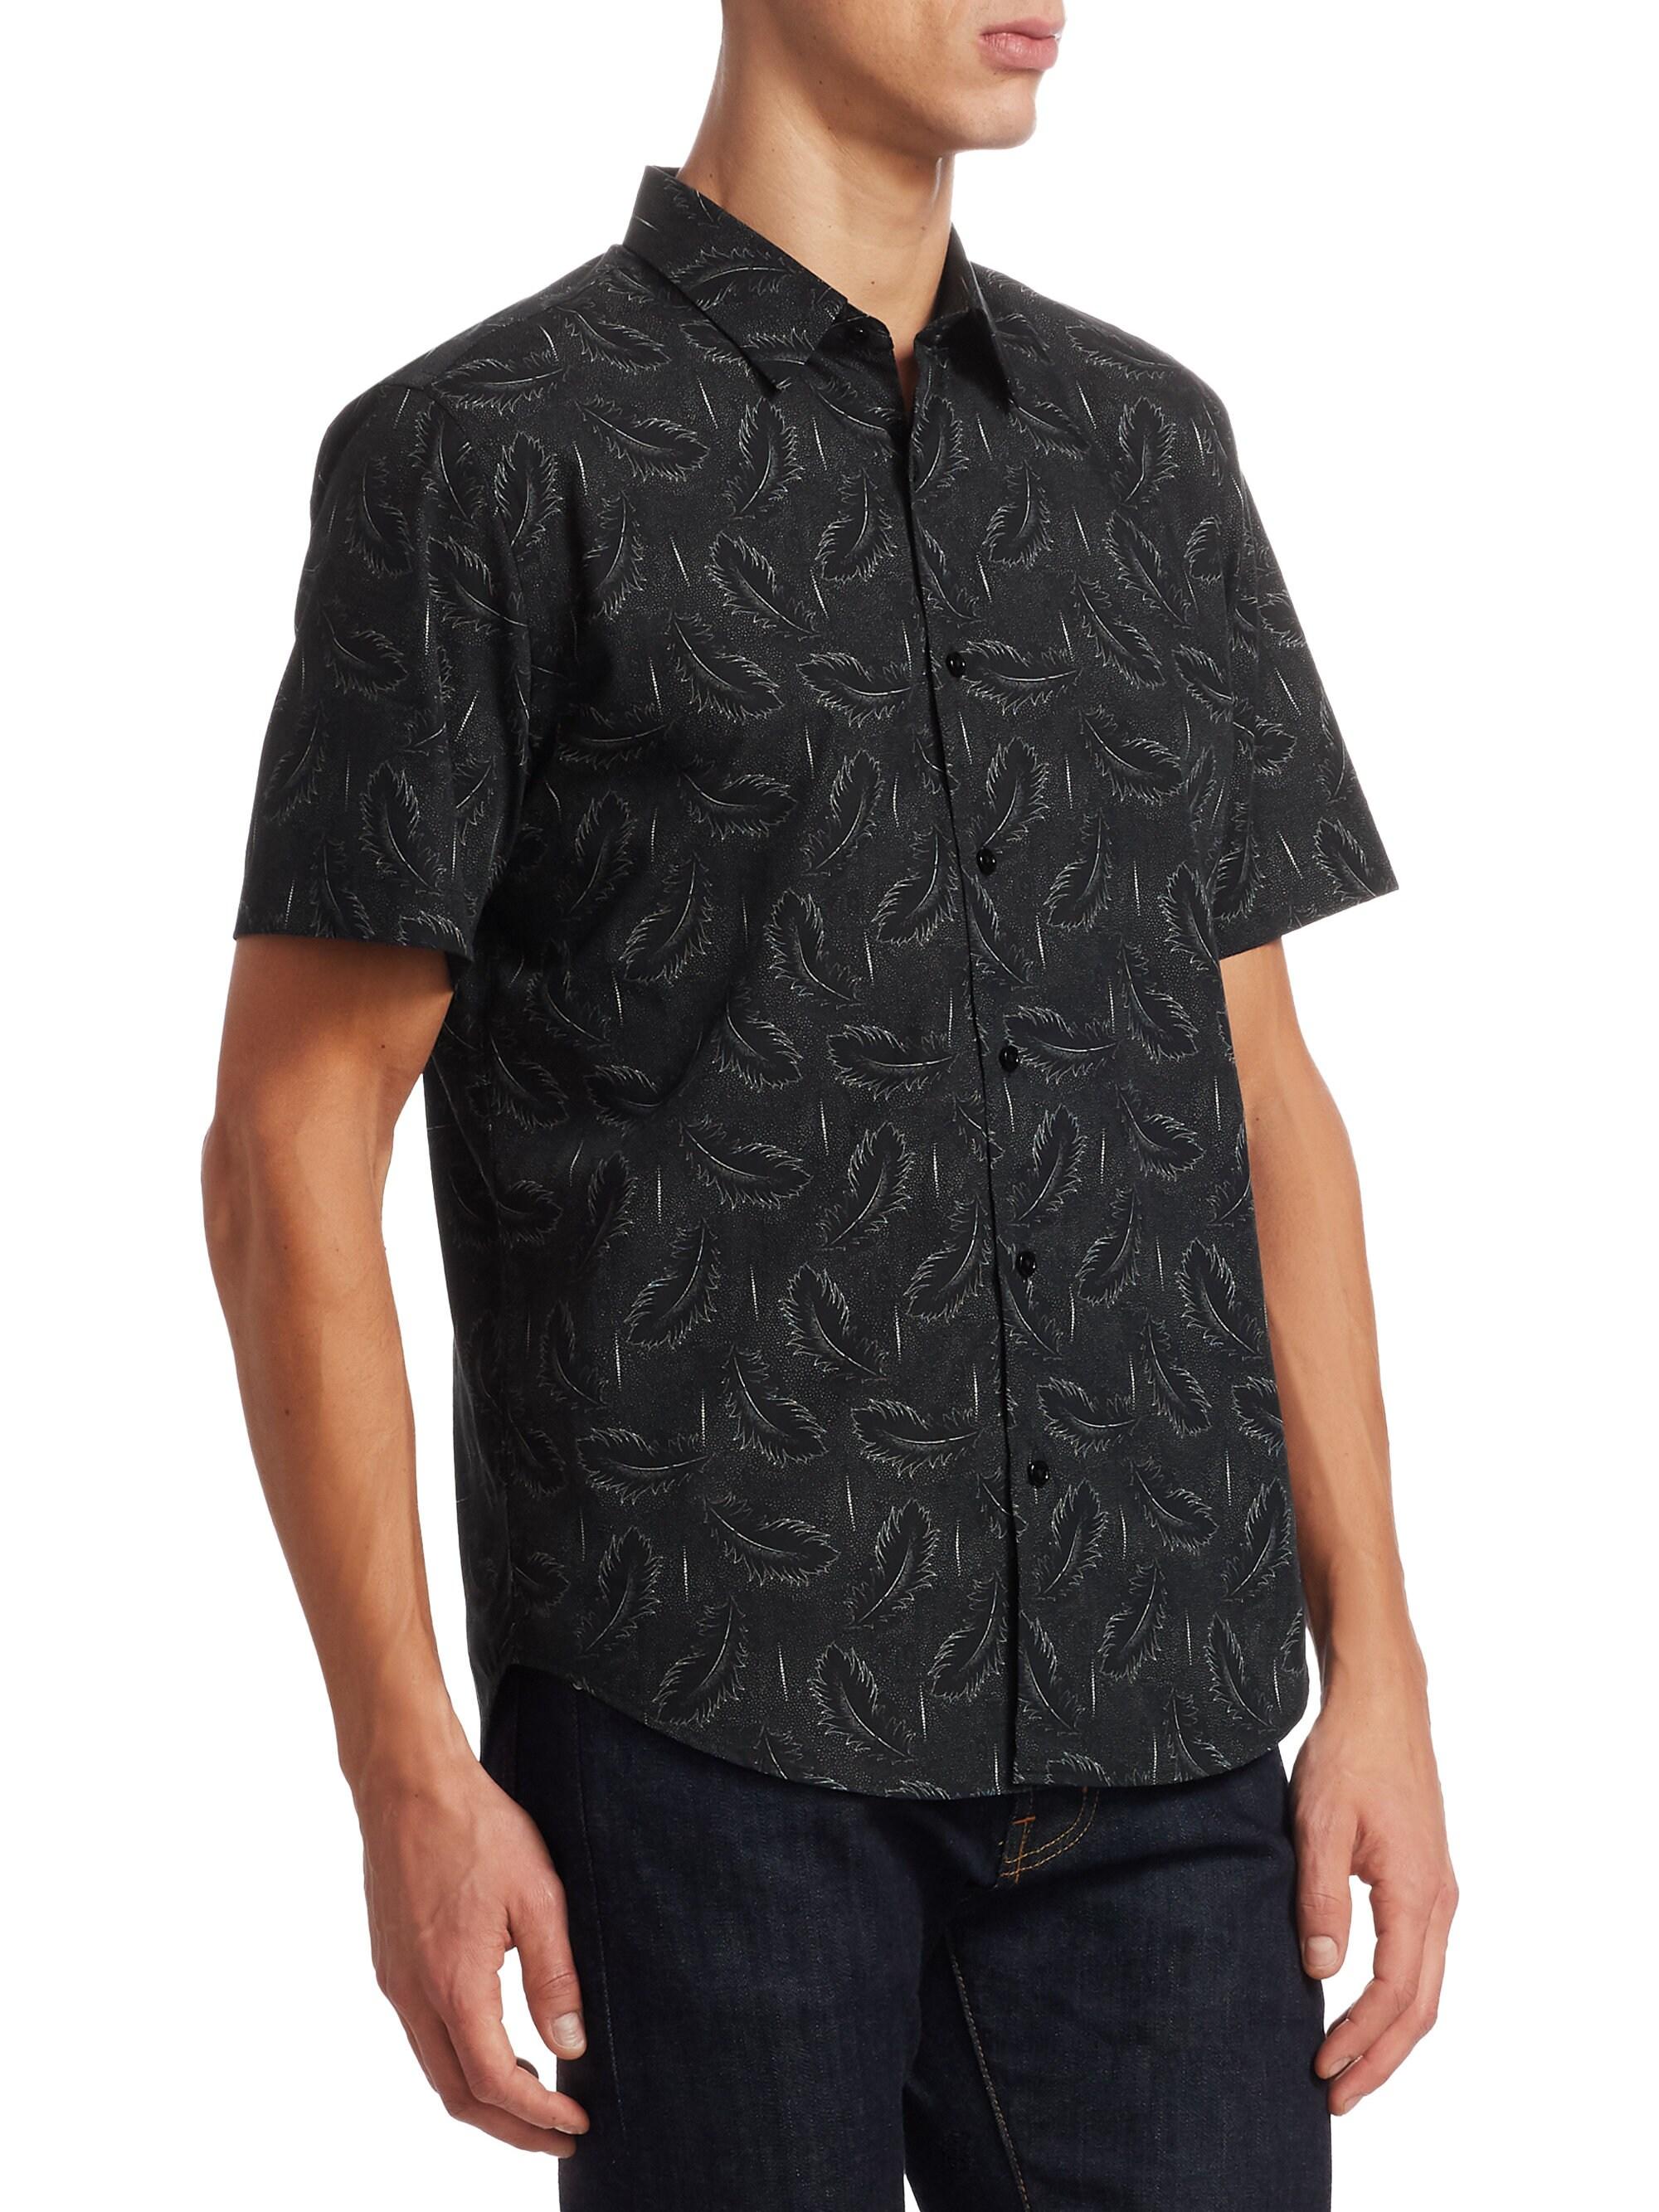 Theory Quill Cotton Button-down Shirt in Black for Men - Lyst